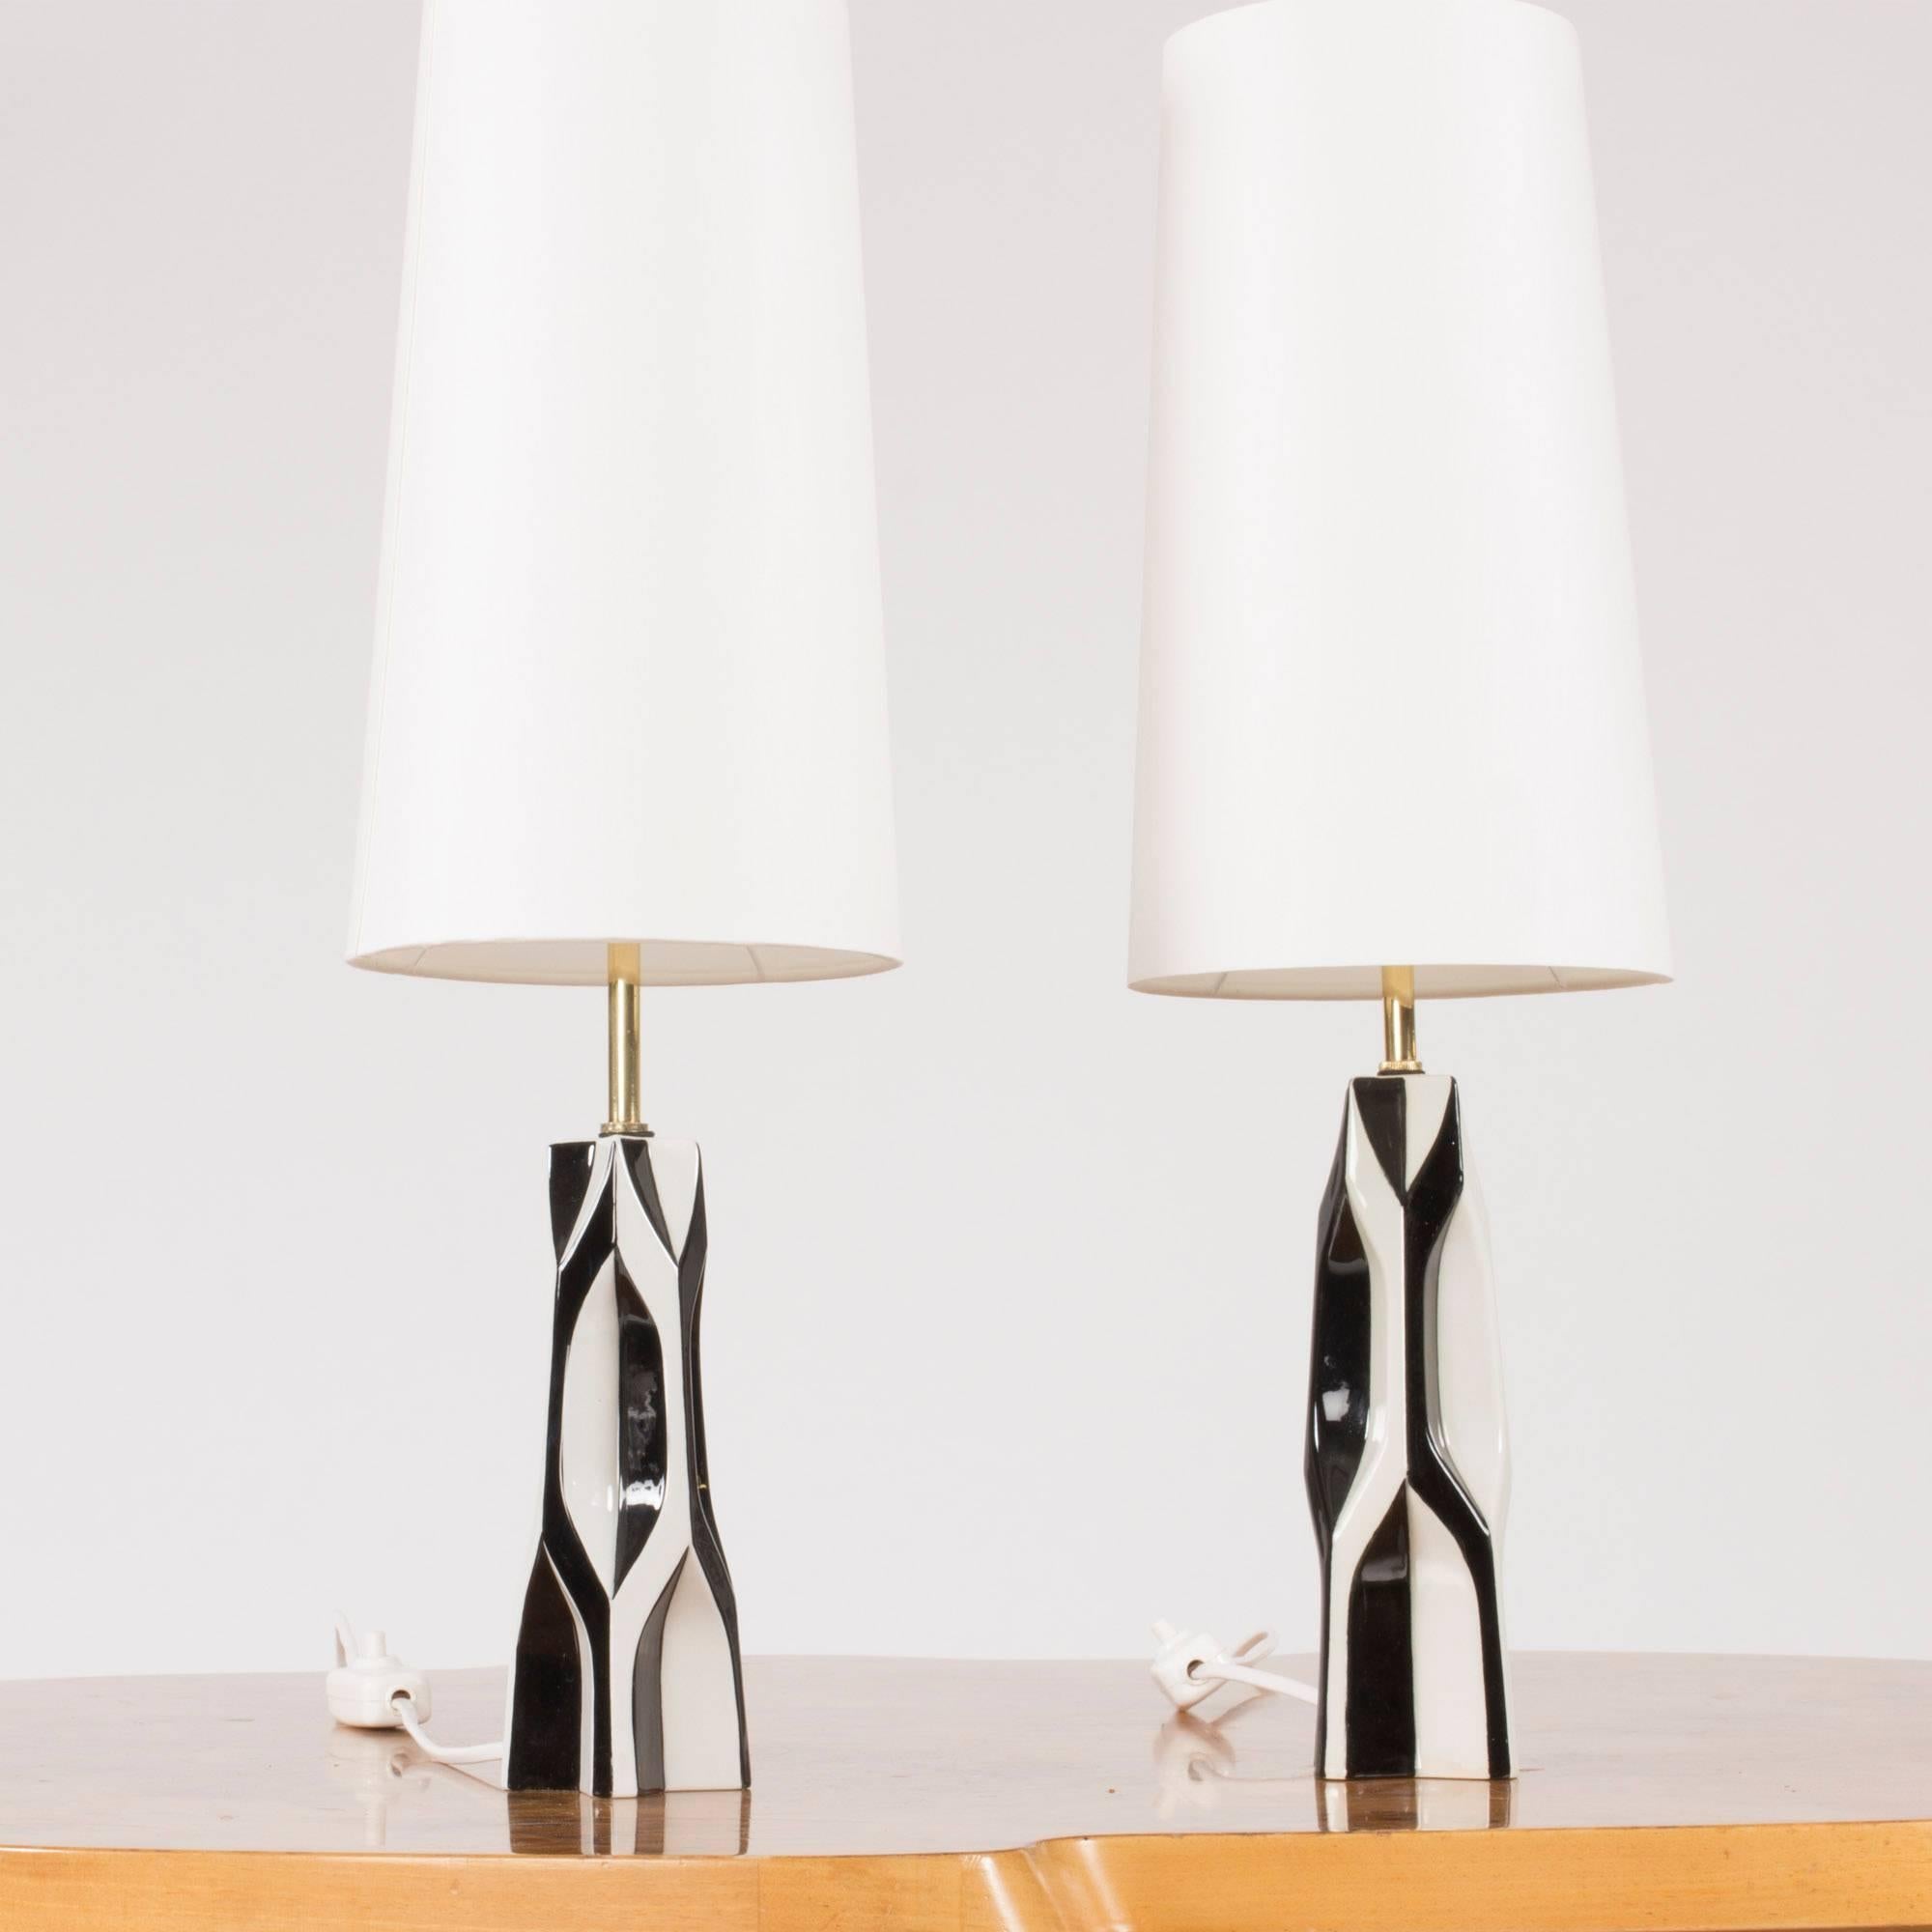 Pair of amazing stoneware table lamps by Carl-Harry Stålhane. Graphical, sculptural bodies with slightly altering heights which is evened out by the height of the brass handles. Striking black and white decor.